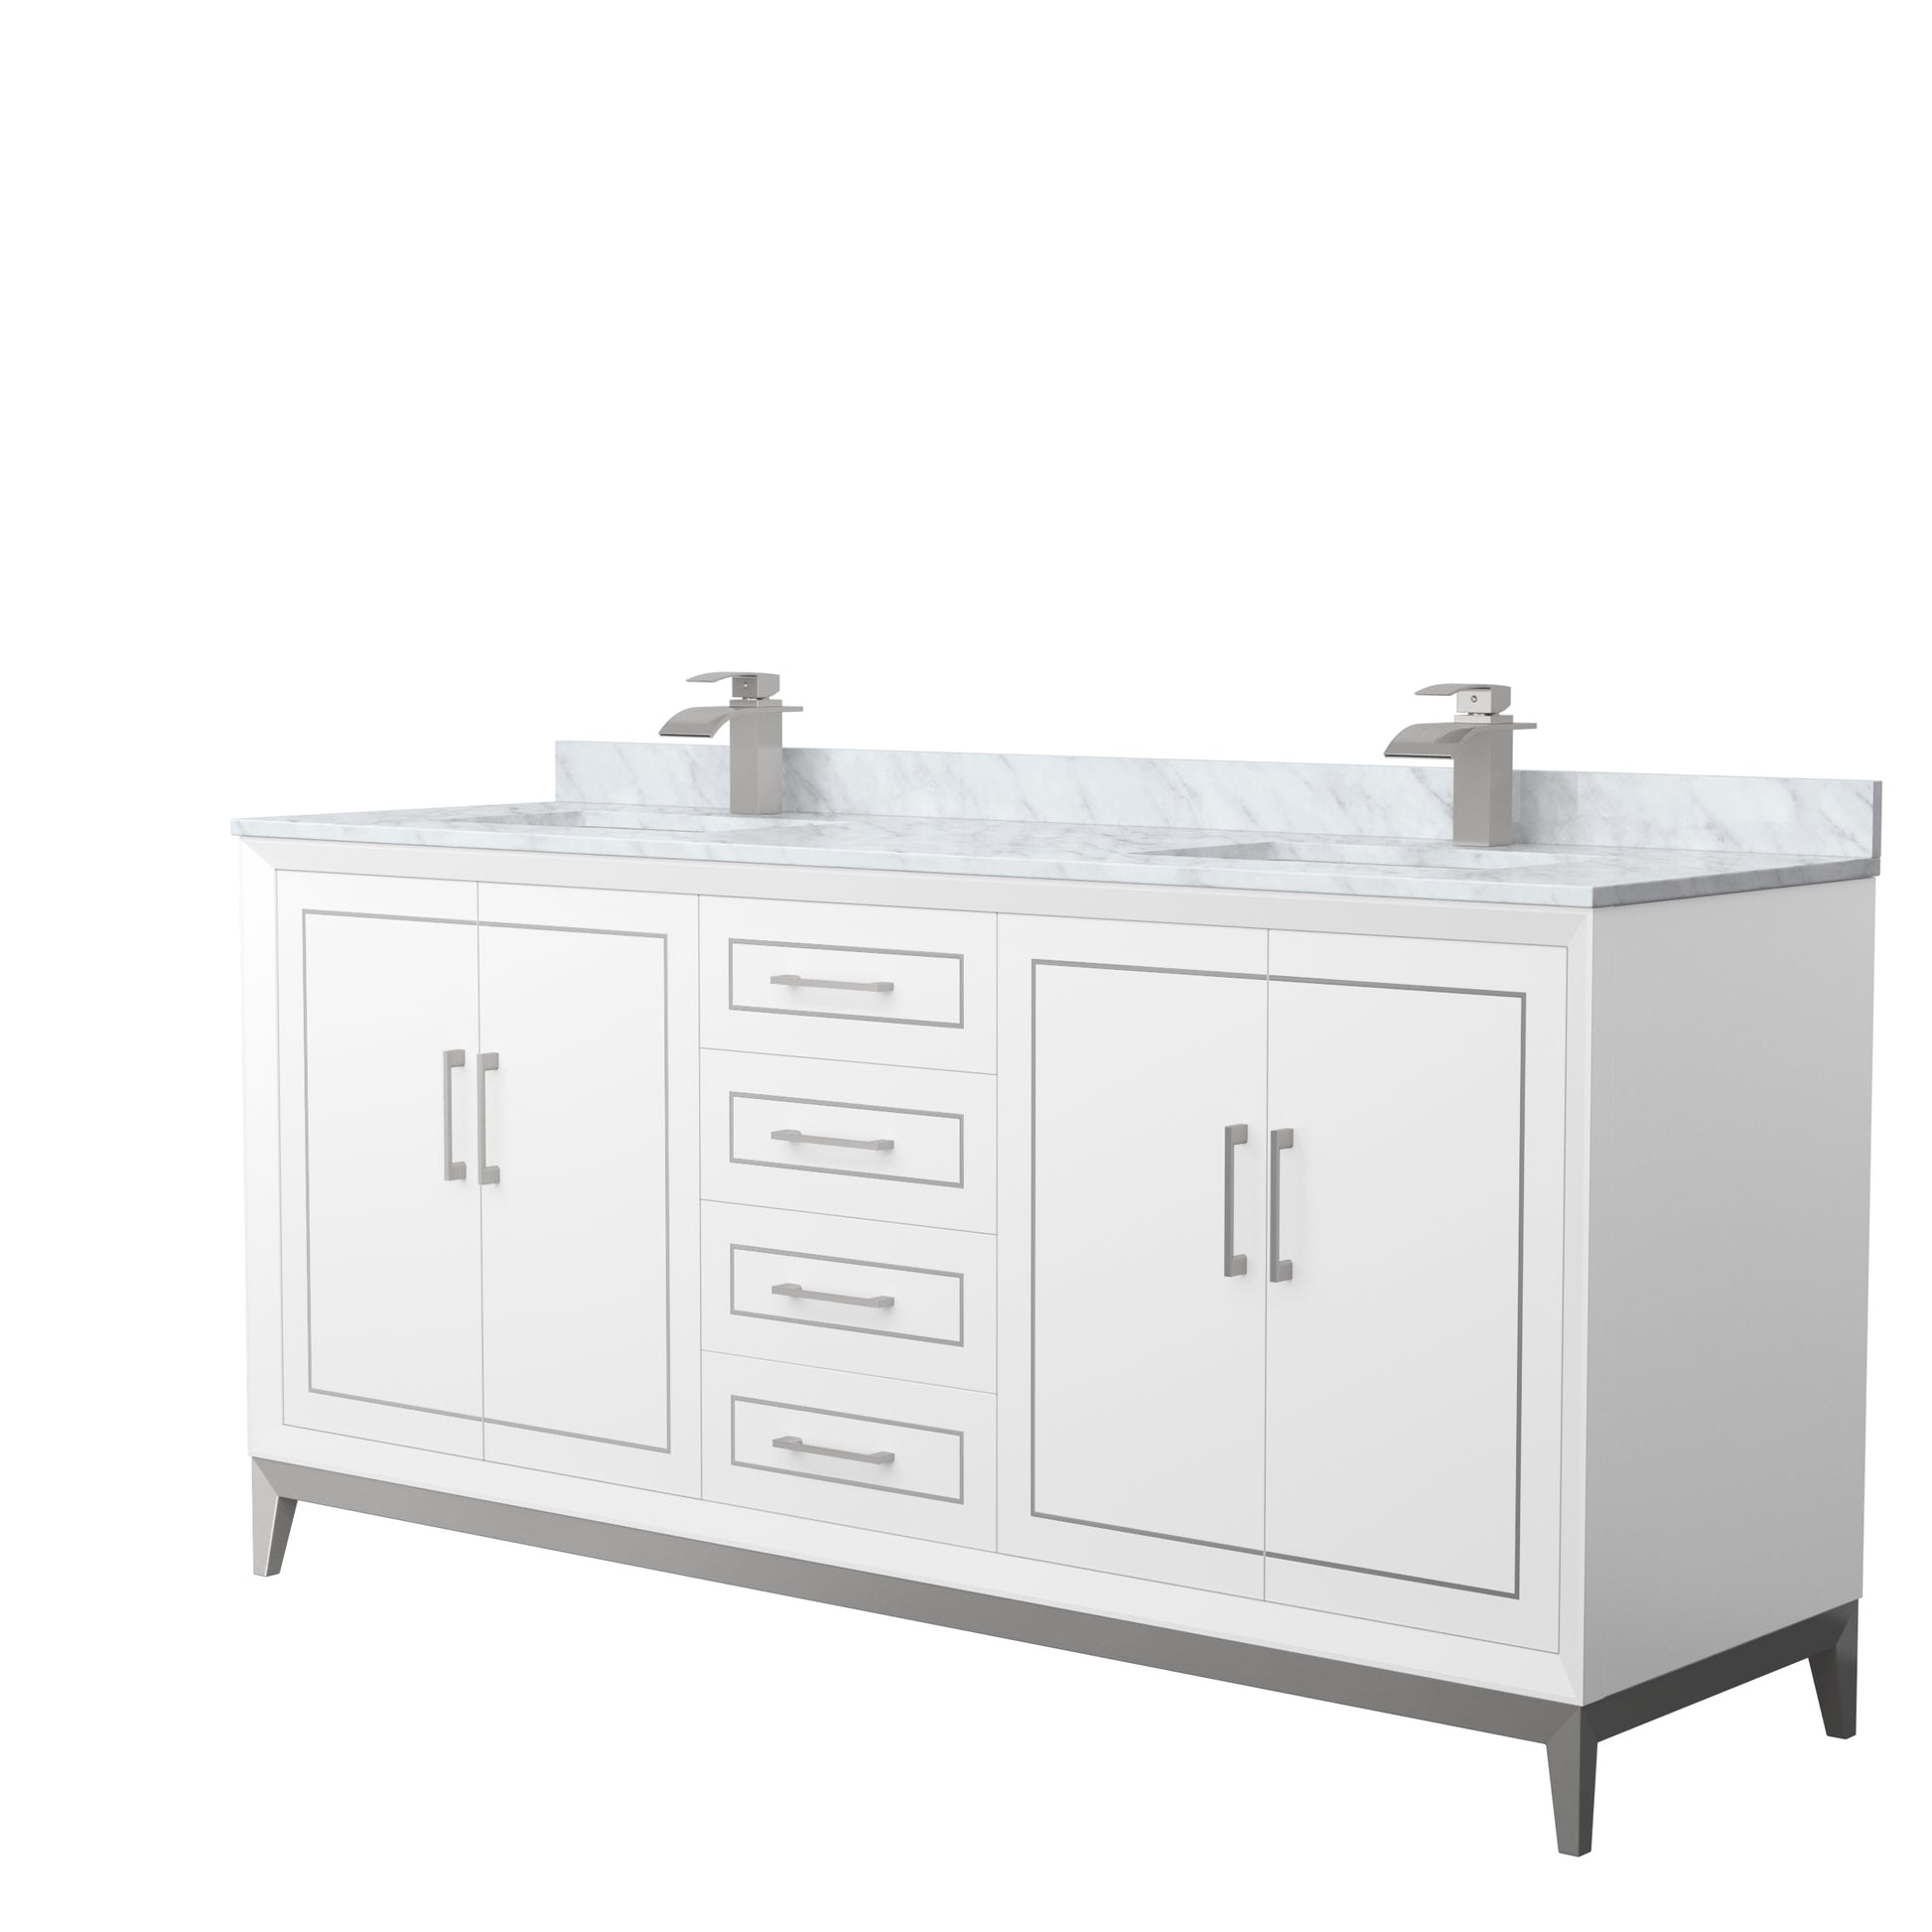 
  
  Marlena 72" Double Sink Vanity with White Carrara Marble, Undermount Square Sink, Optional Trim
  
